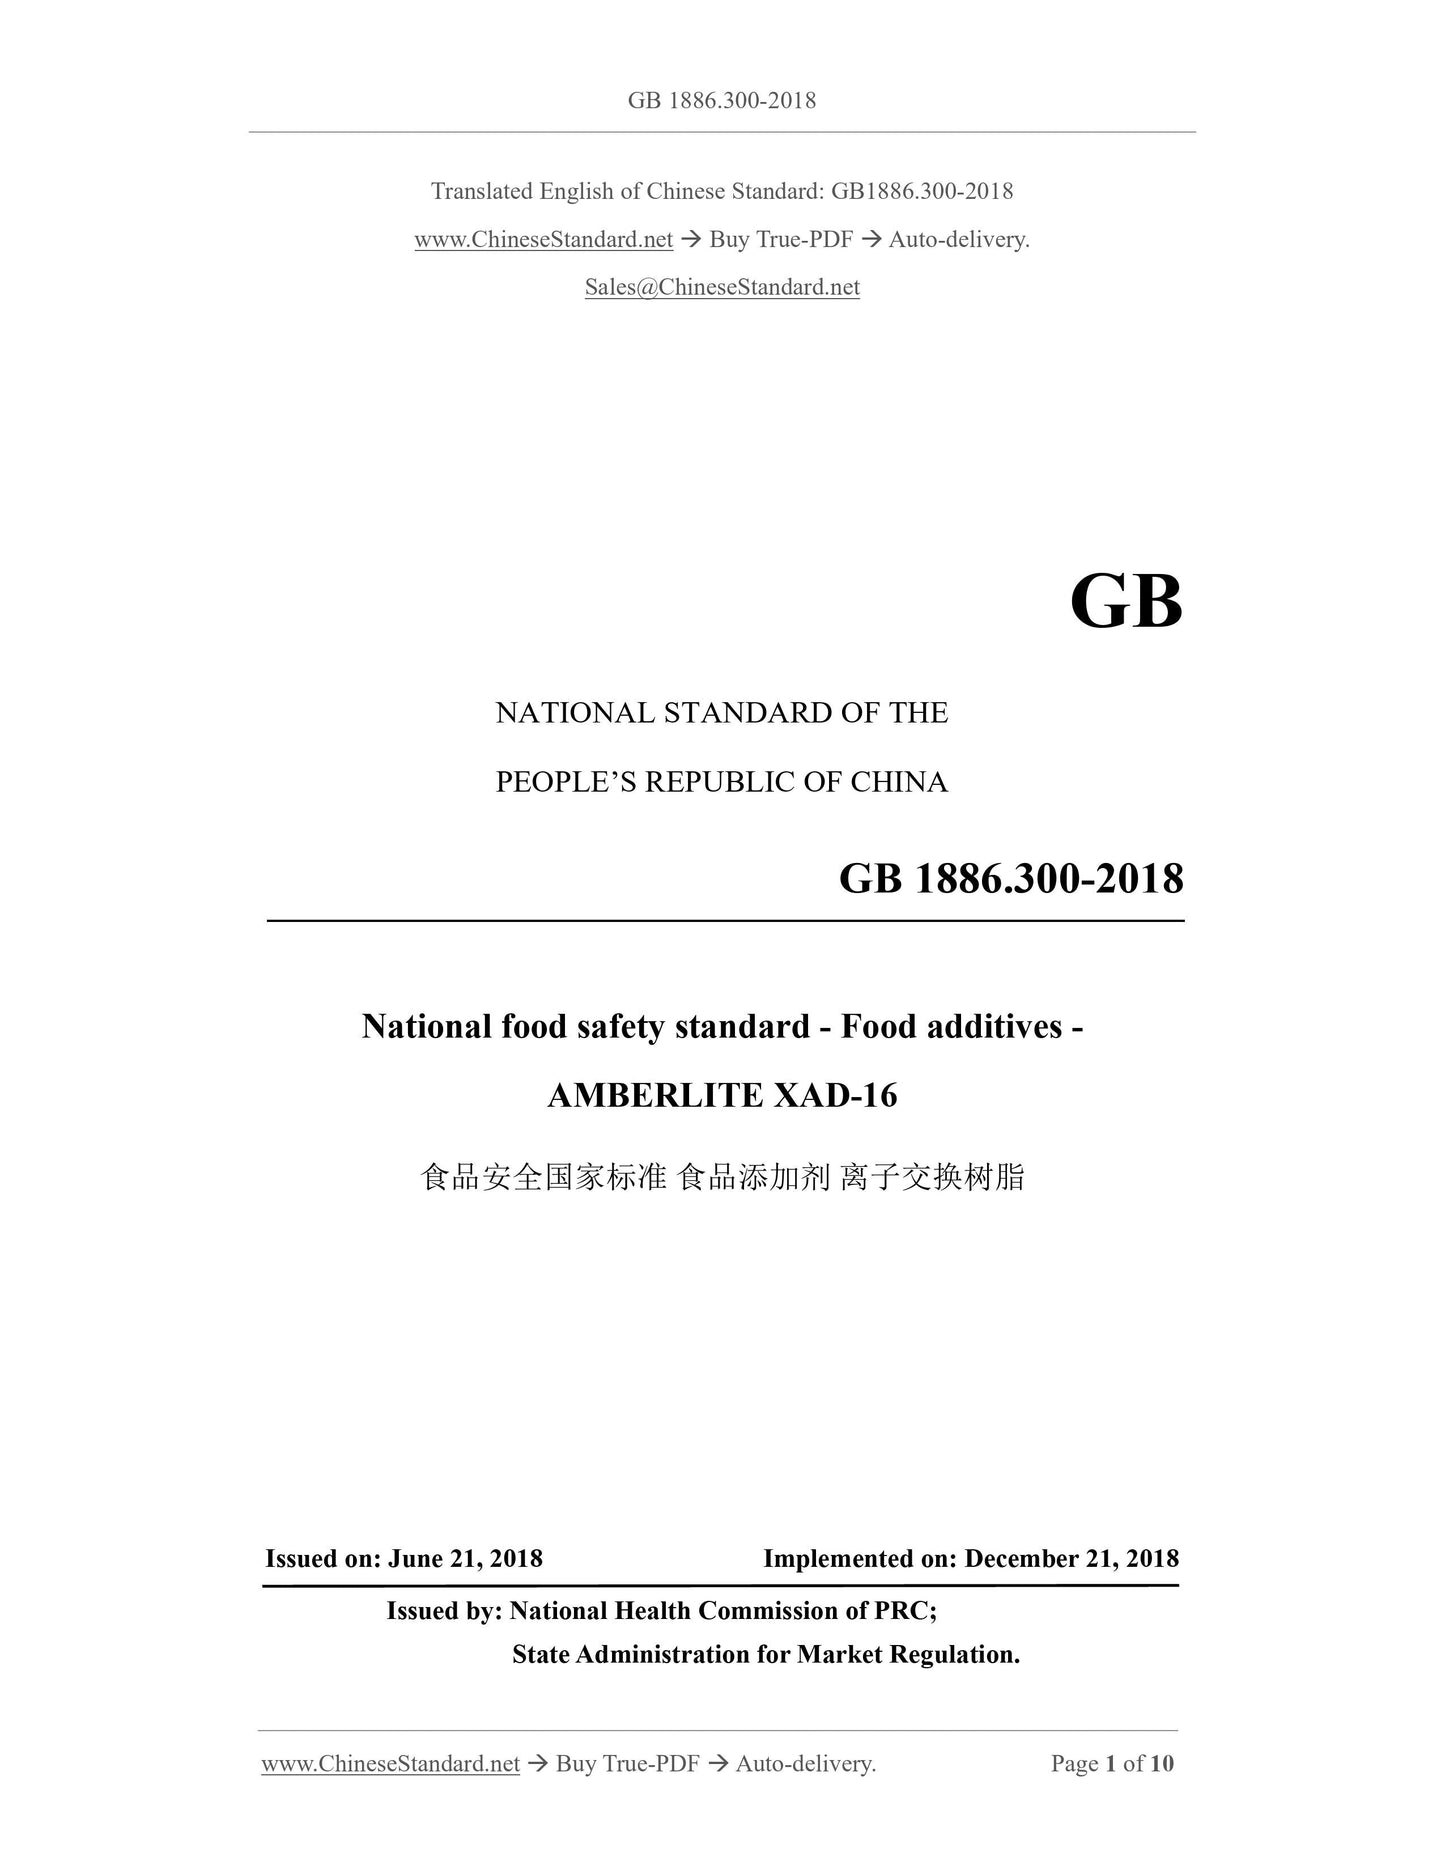 GB 1886.300-2018 Page 1